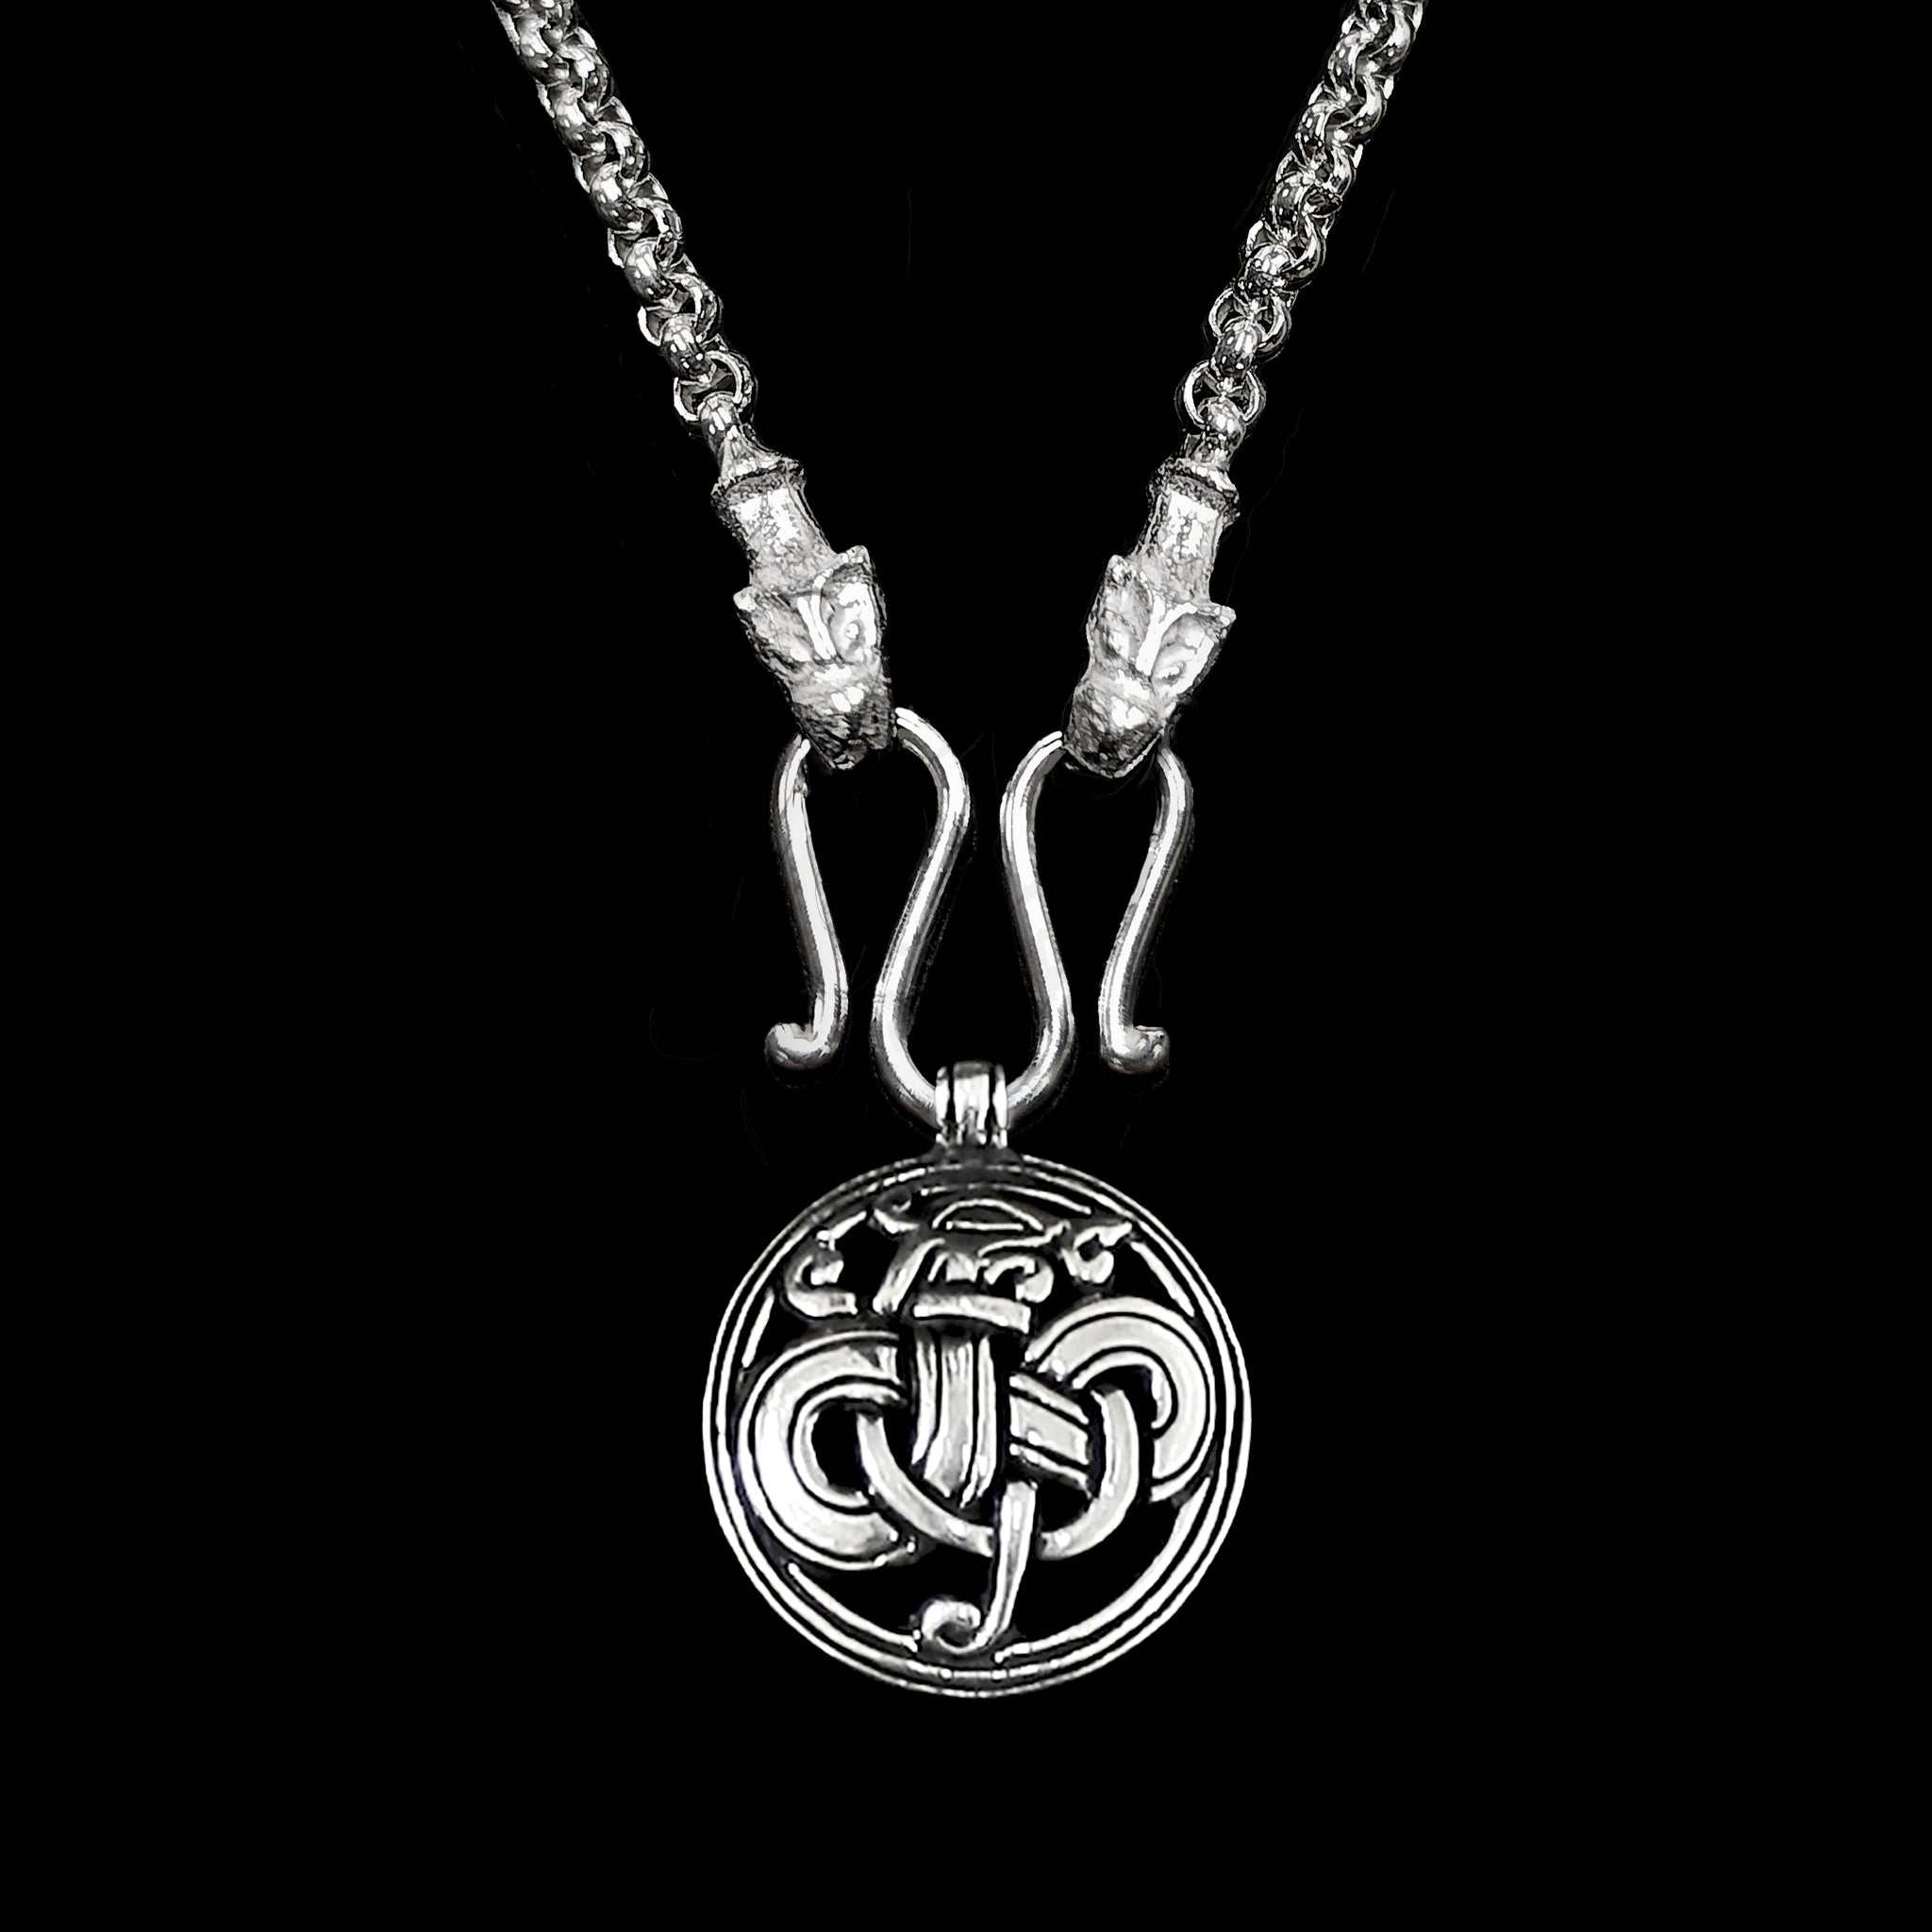 Slim Silver Anchor Chain Pendant Necklace with Icelandic Wolf Heads with Urnes Dragon Viking Pendant